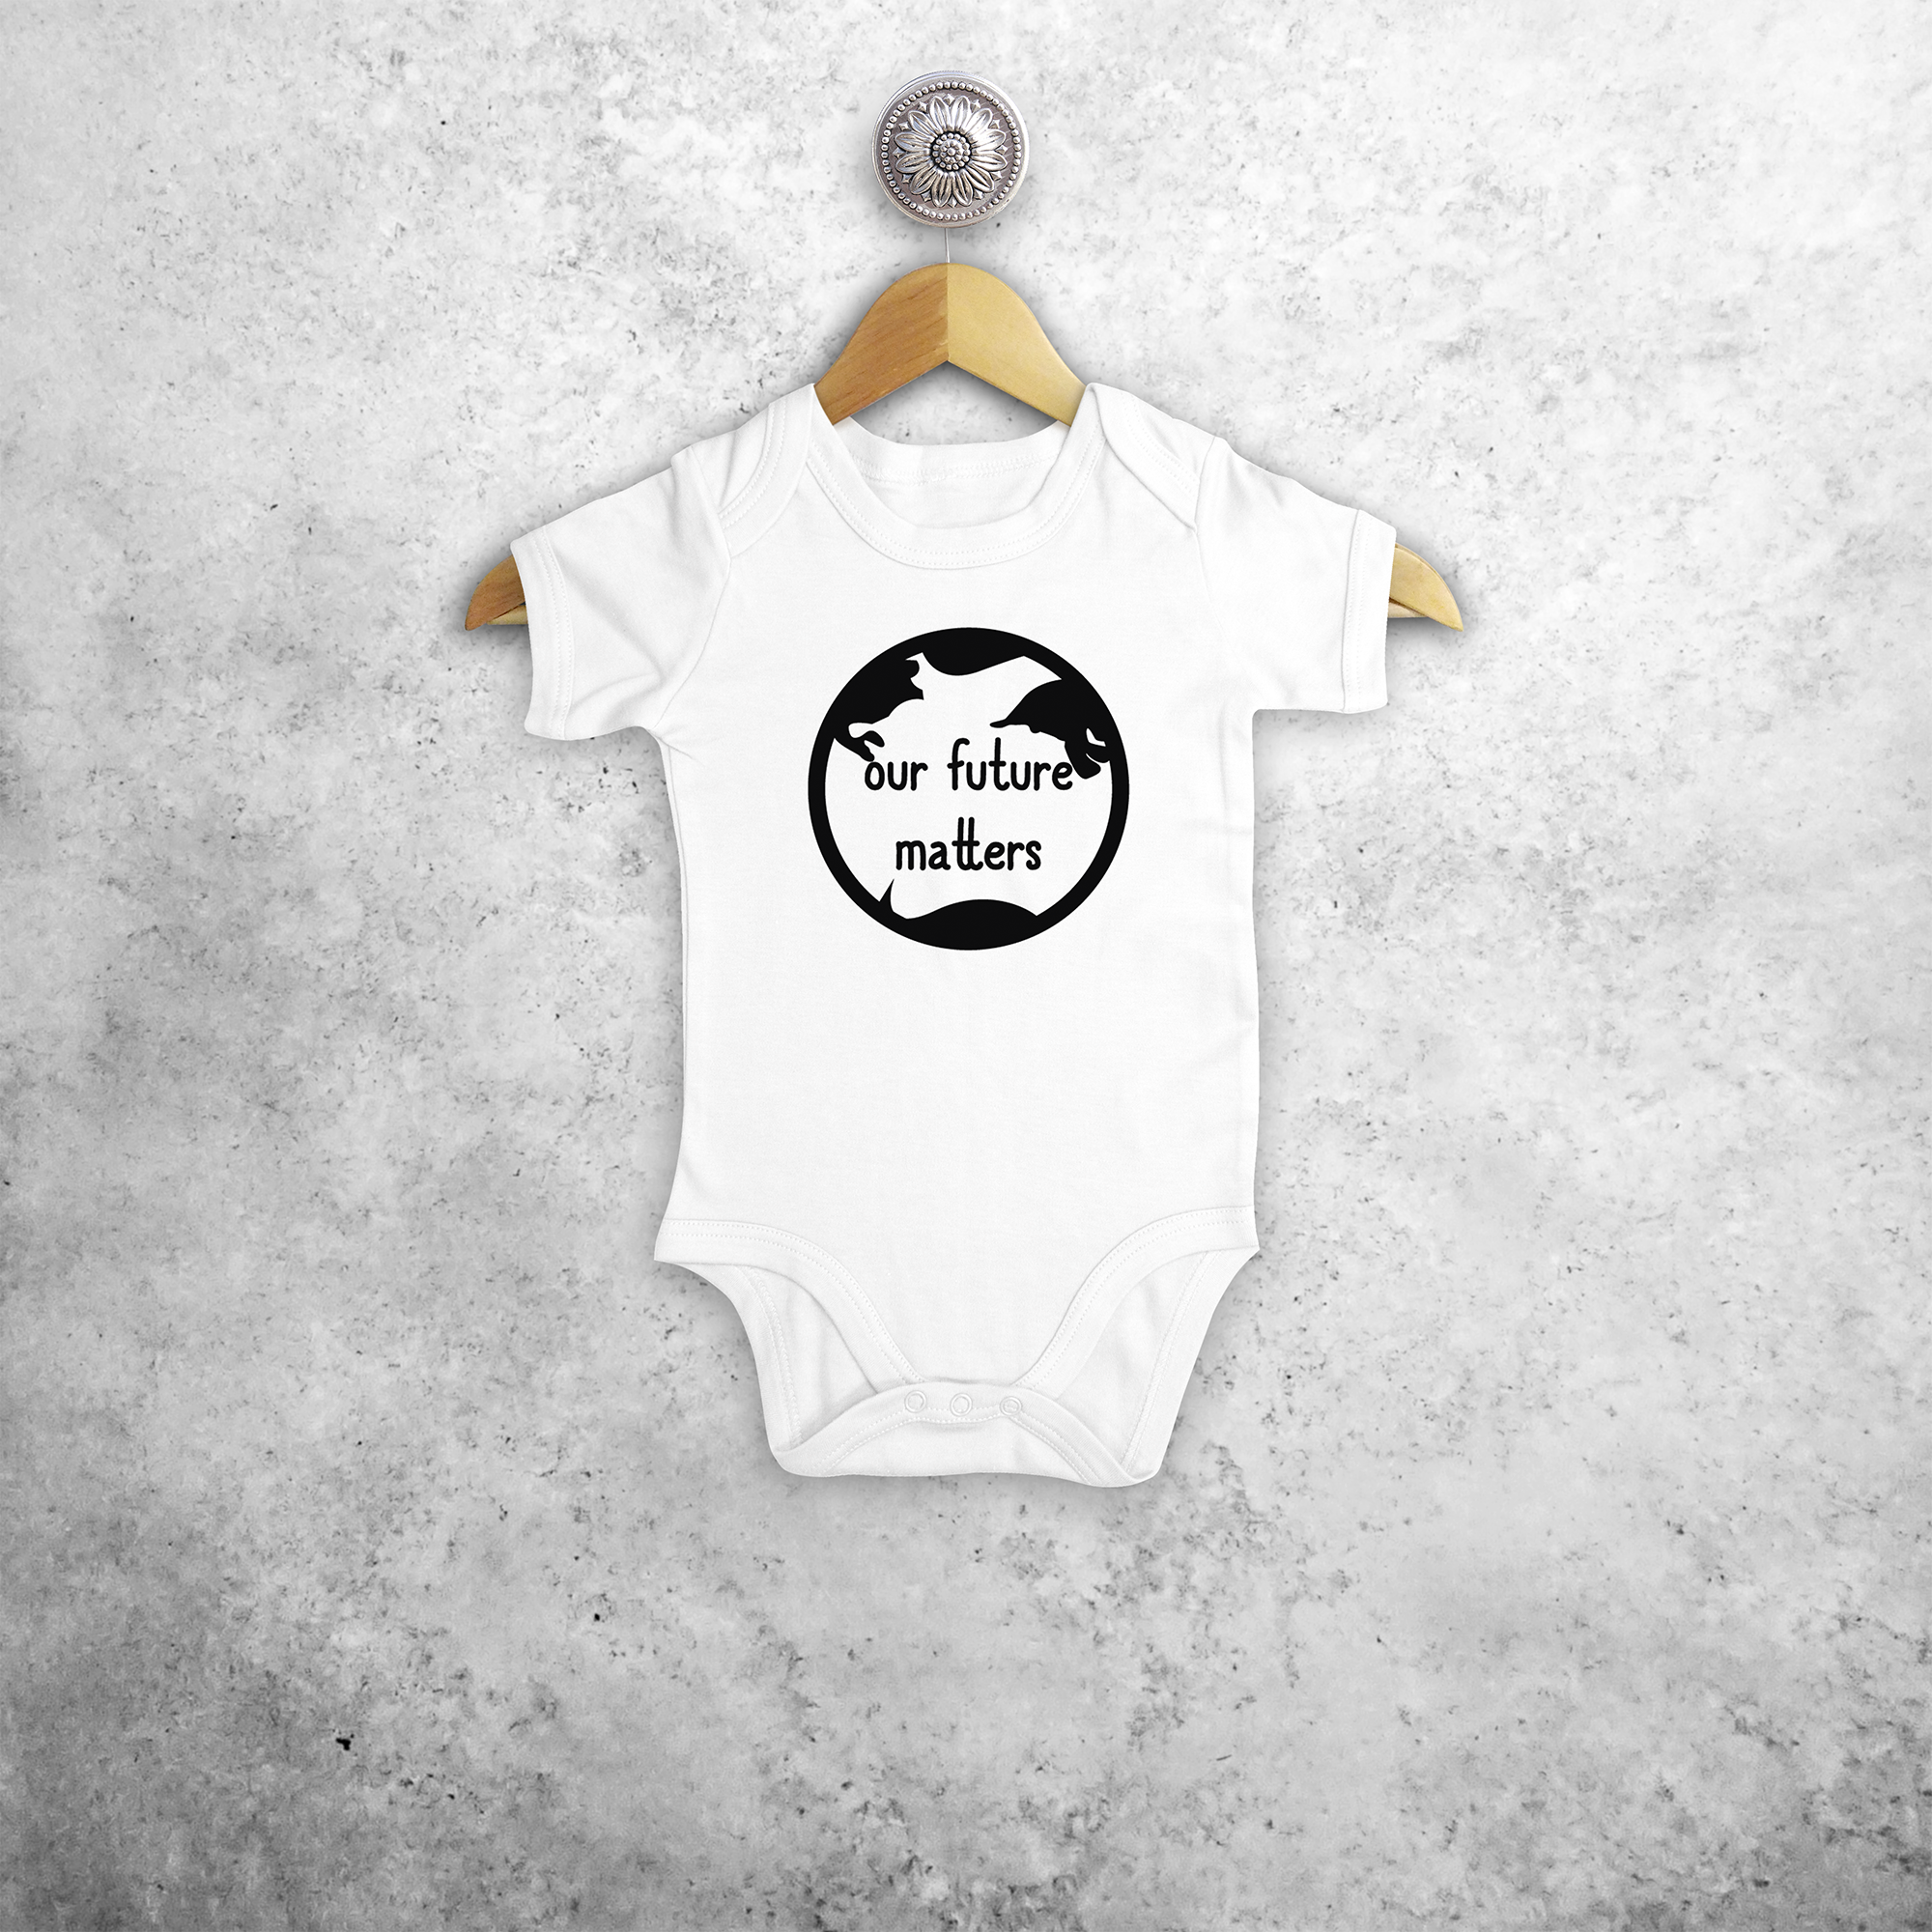 'Our future matters' baby shortsleeve bodysuit